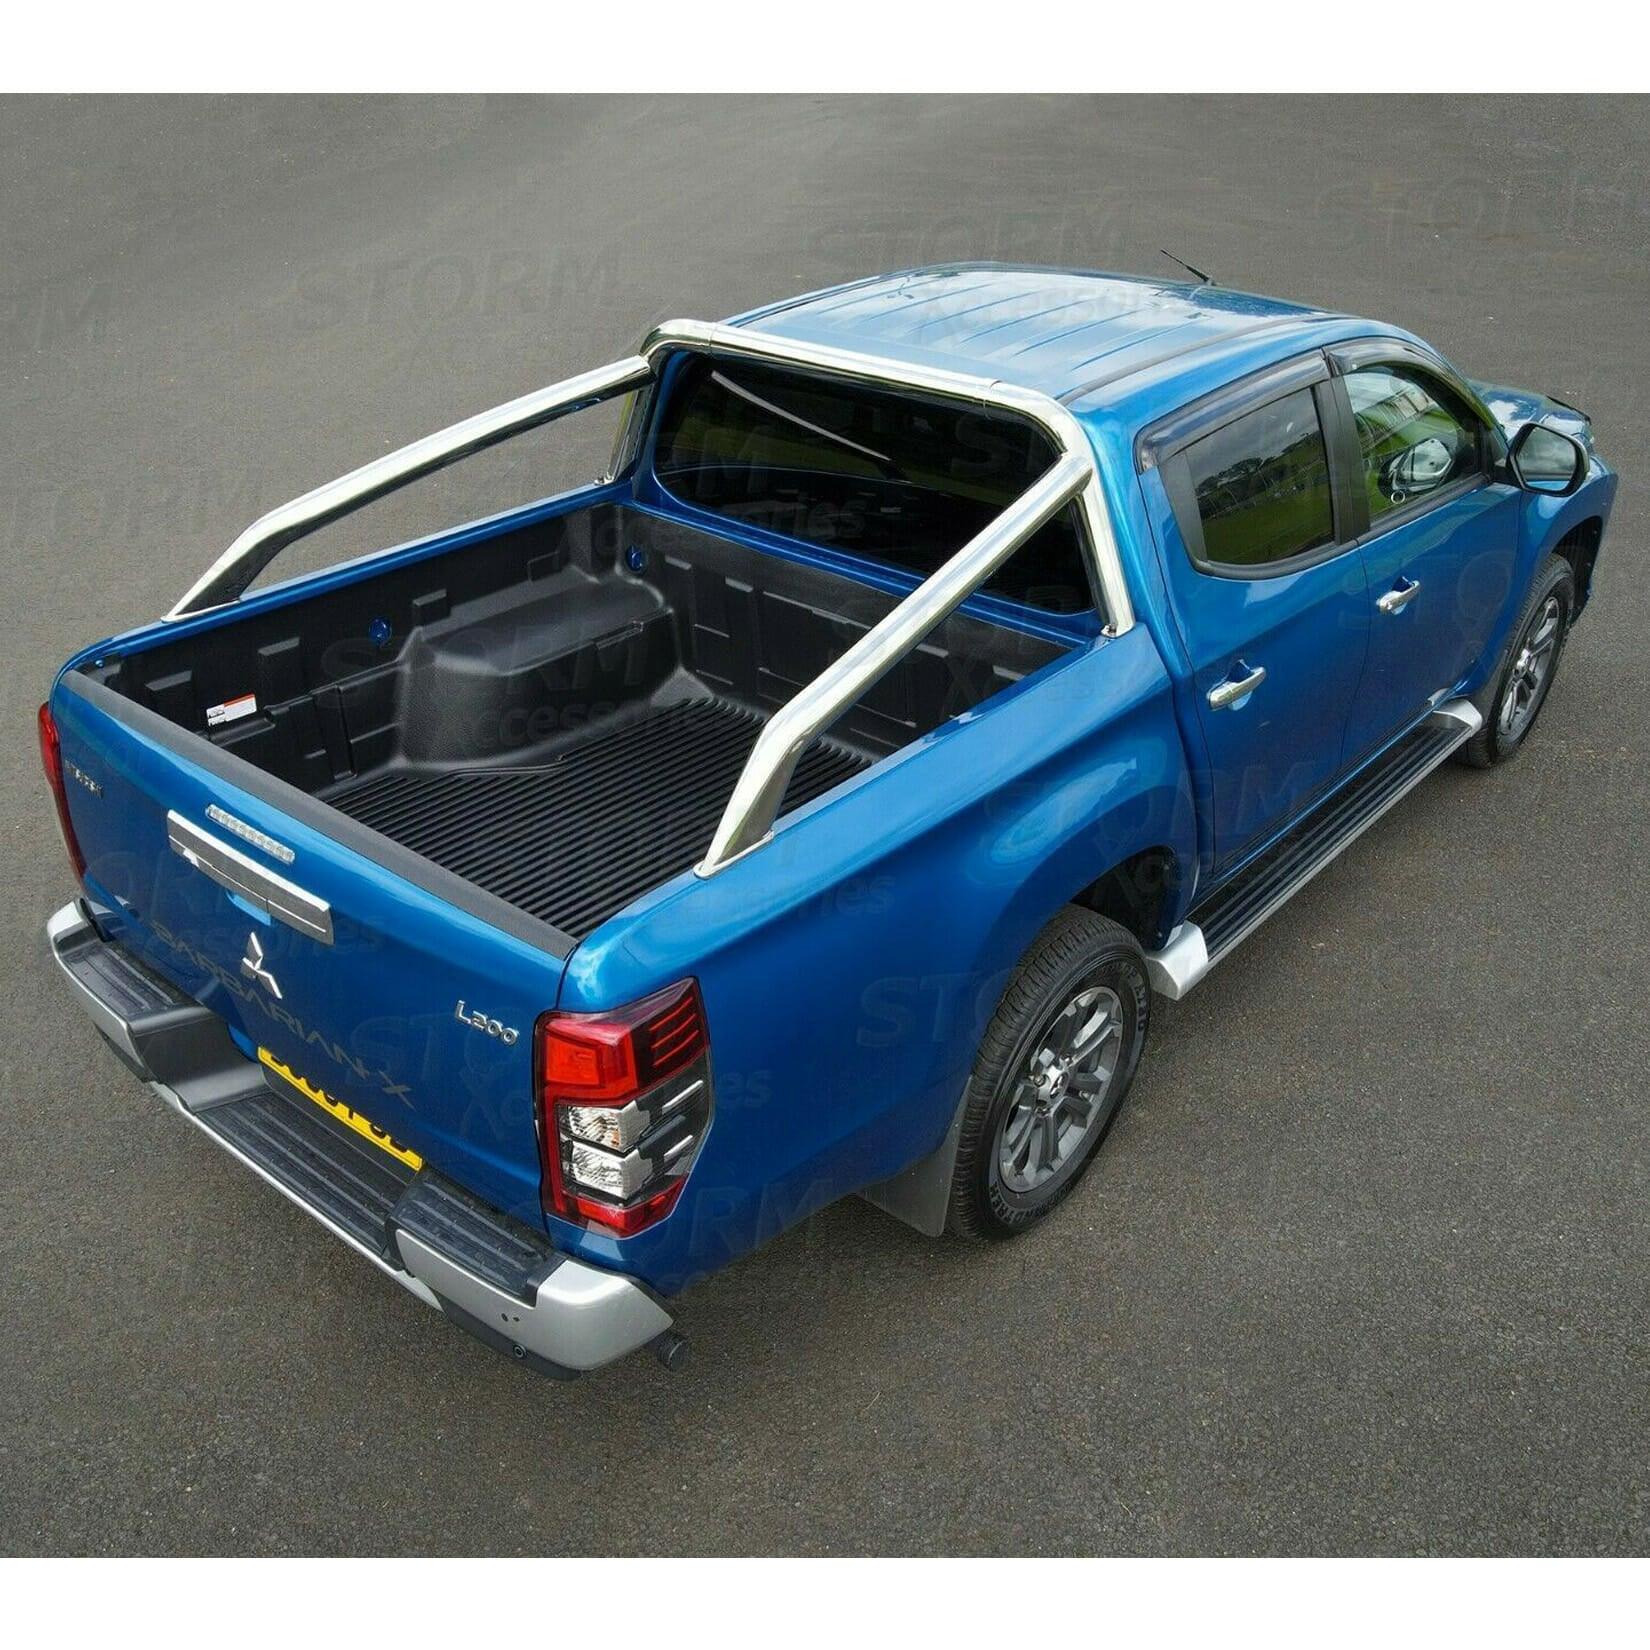 MITSUBISHI L200 SERIES 5 - 6 - LONG BED - FIAT FULLBACK - STAINLESS STEEL LONG REACH SPORT ROLL BAR - Storm Xccessories2